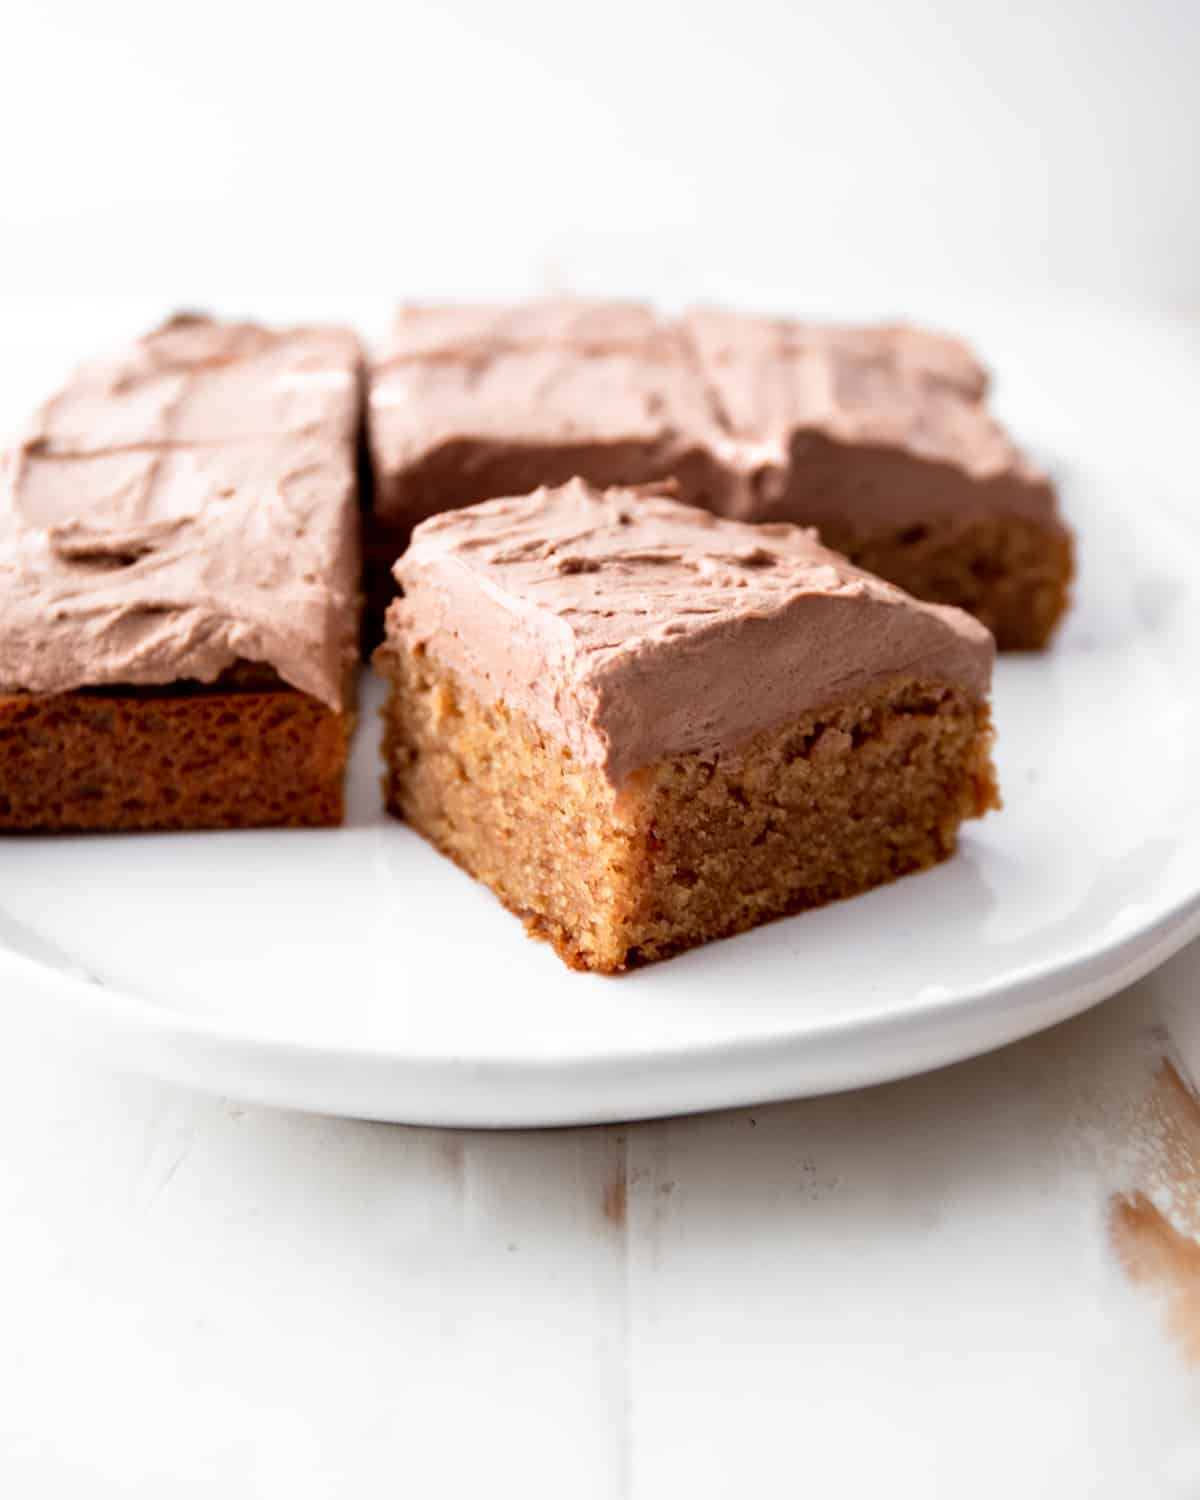 a square cake with chocolate frosting  cut into squares on a white plate